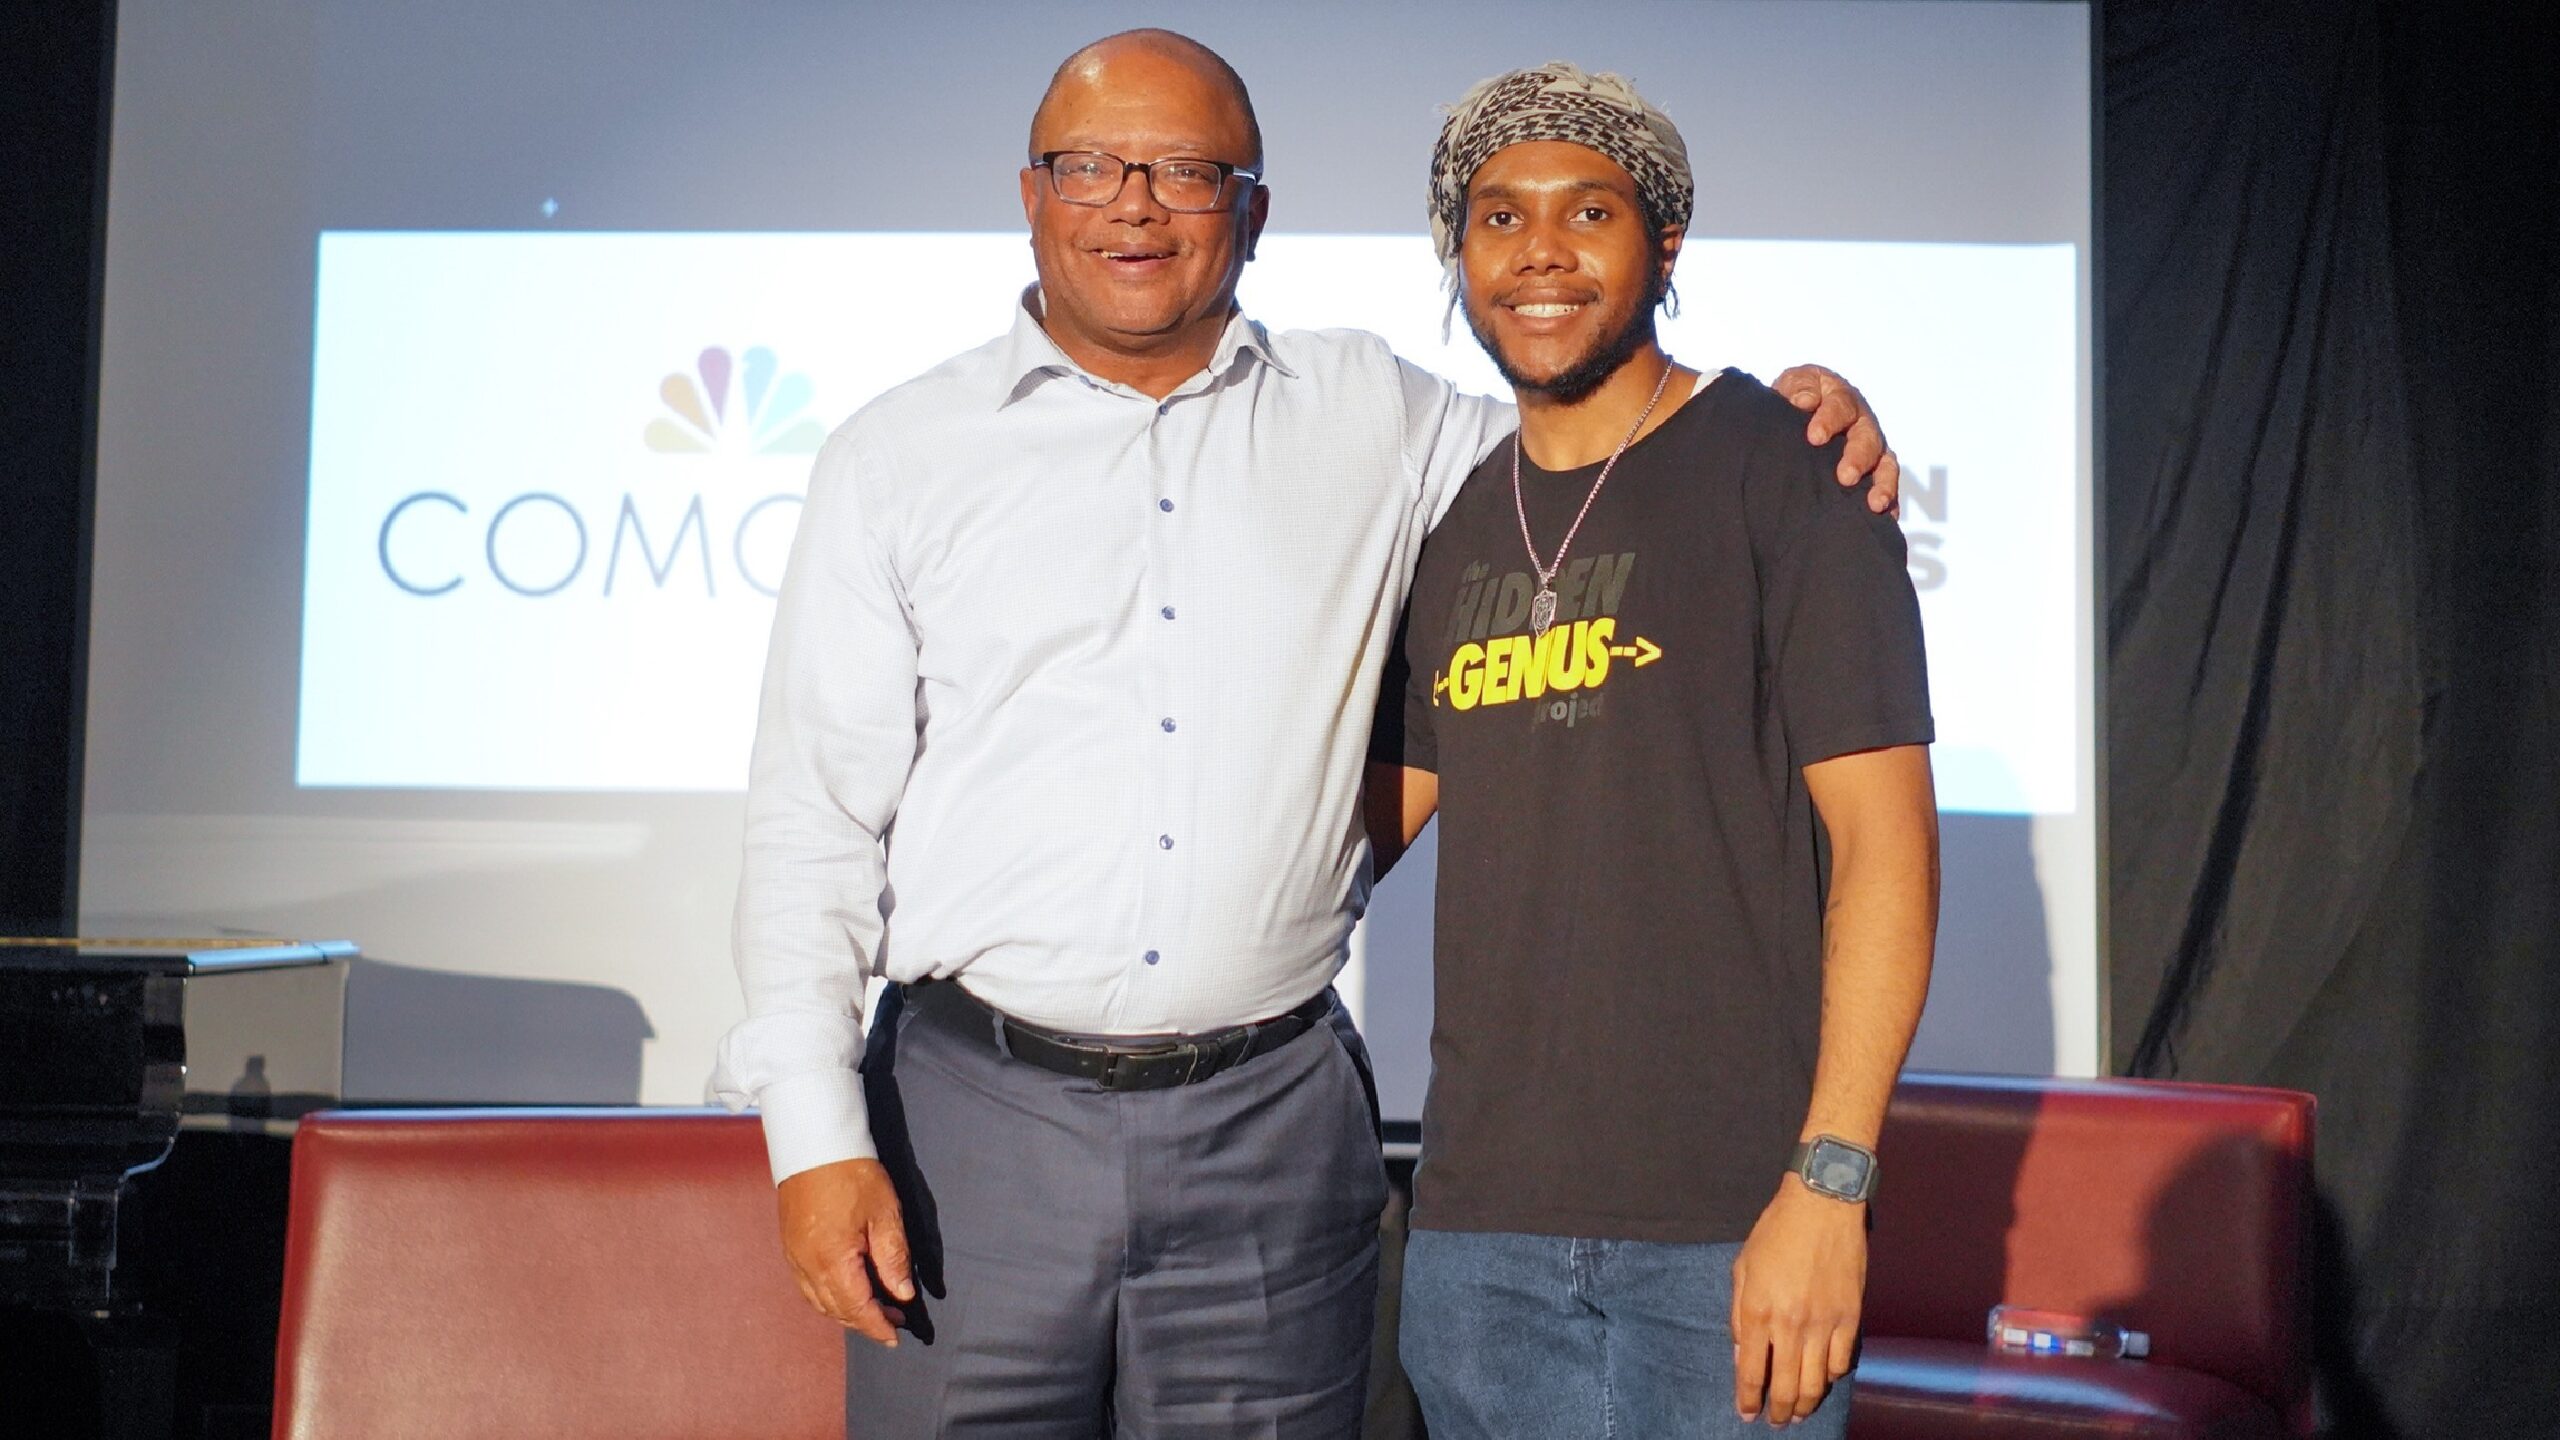 Comcast Hosts Fireside Chat at The Hidden Genius Project in Oakland, Donating Free Laptops to Members